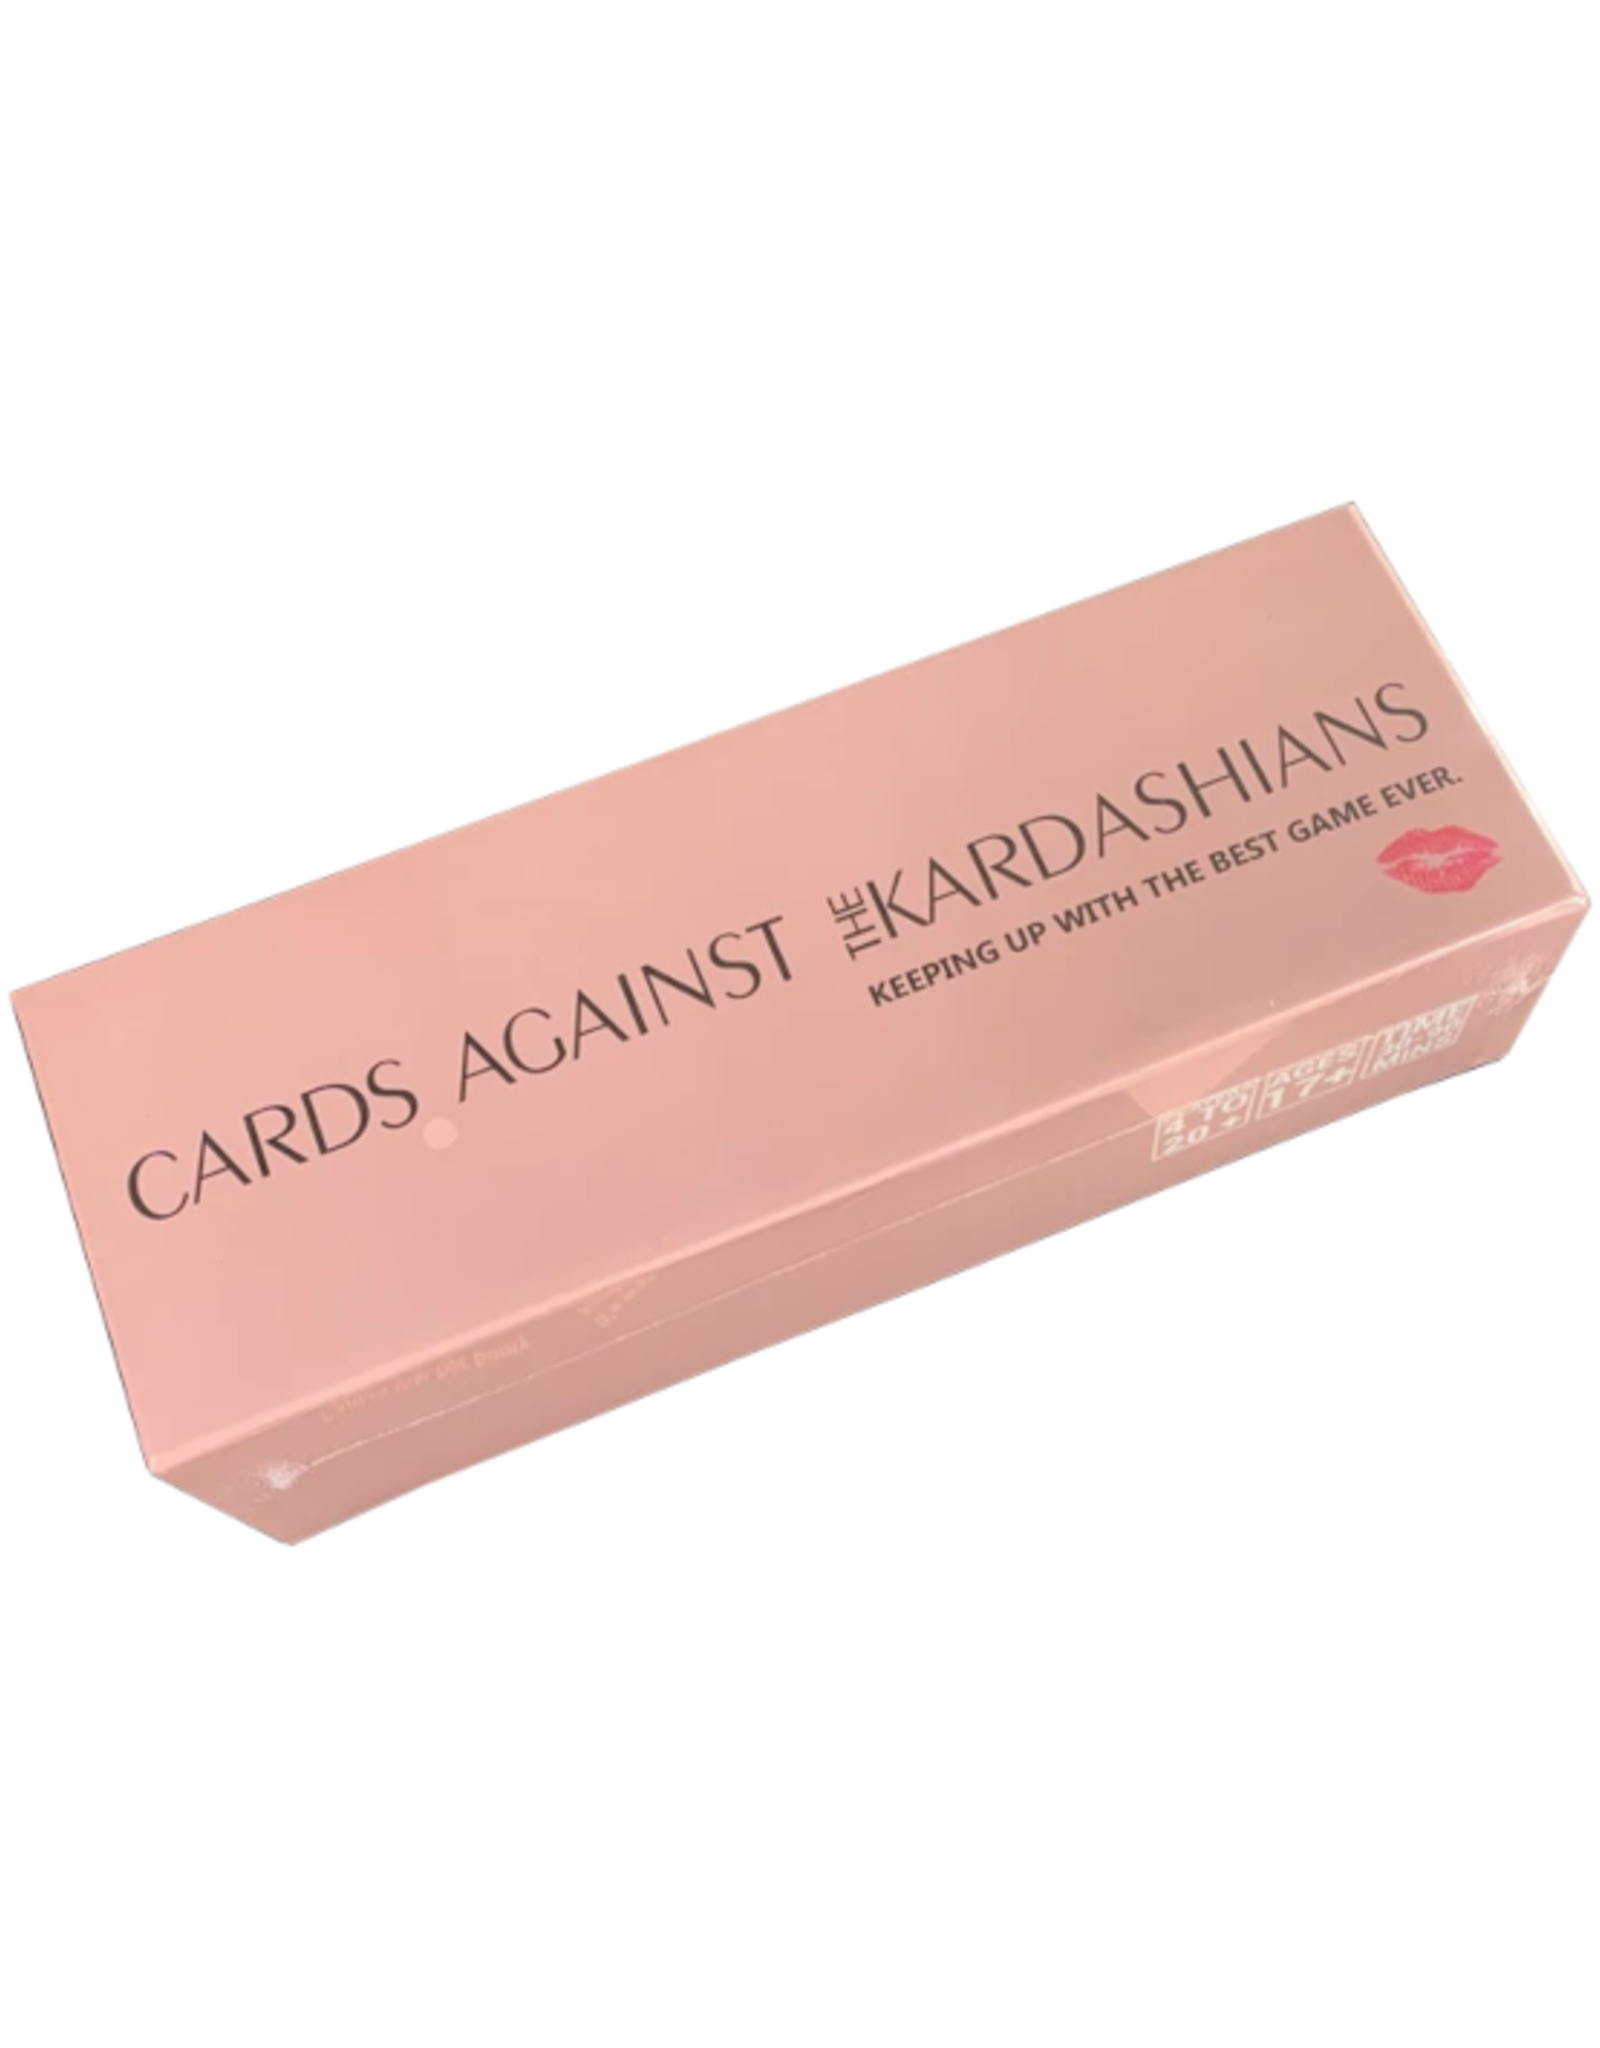 Cards Against - Cards Against The Kardashians (17+, Adult)